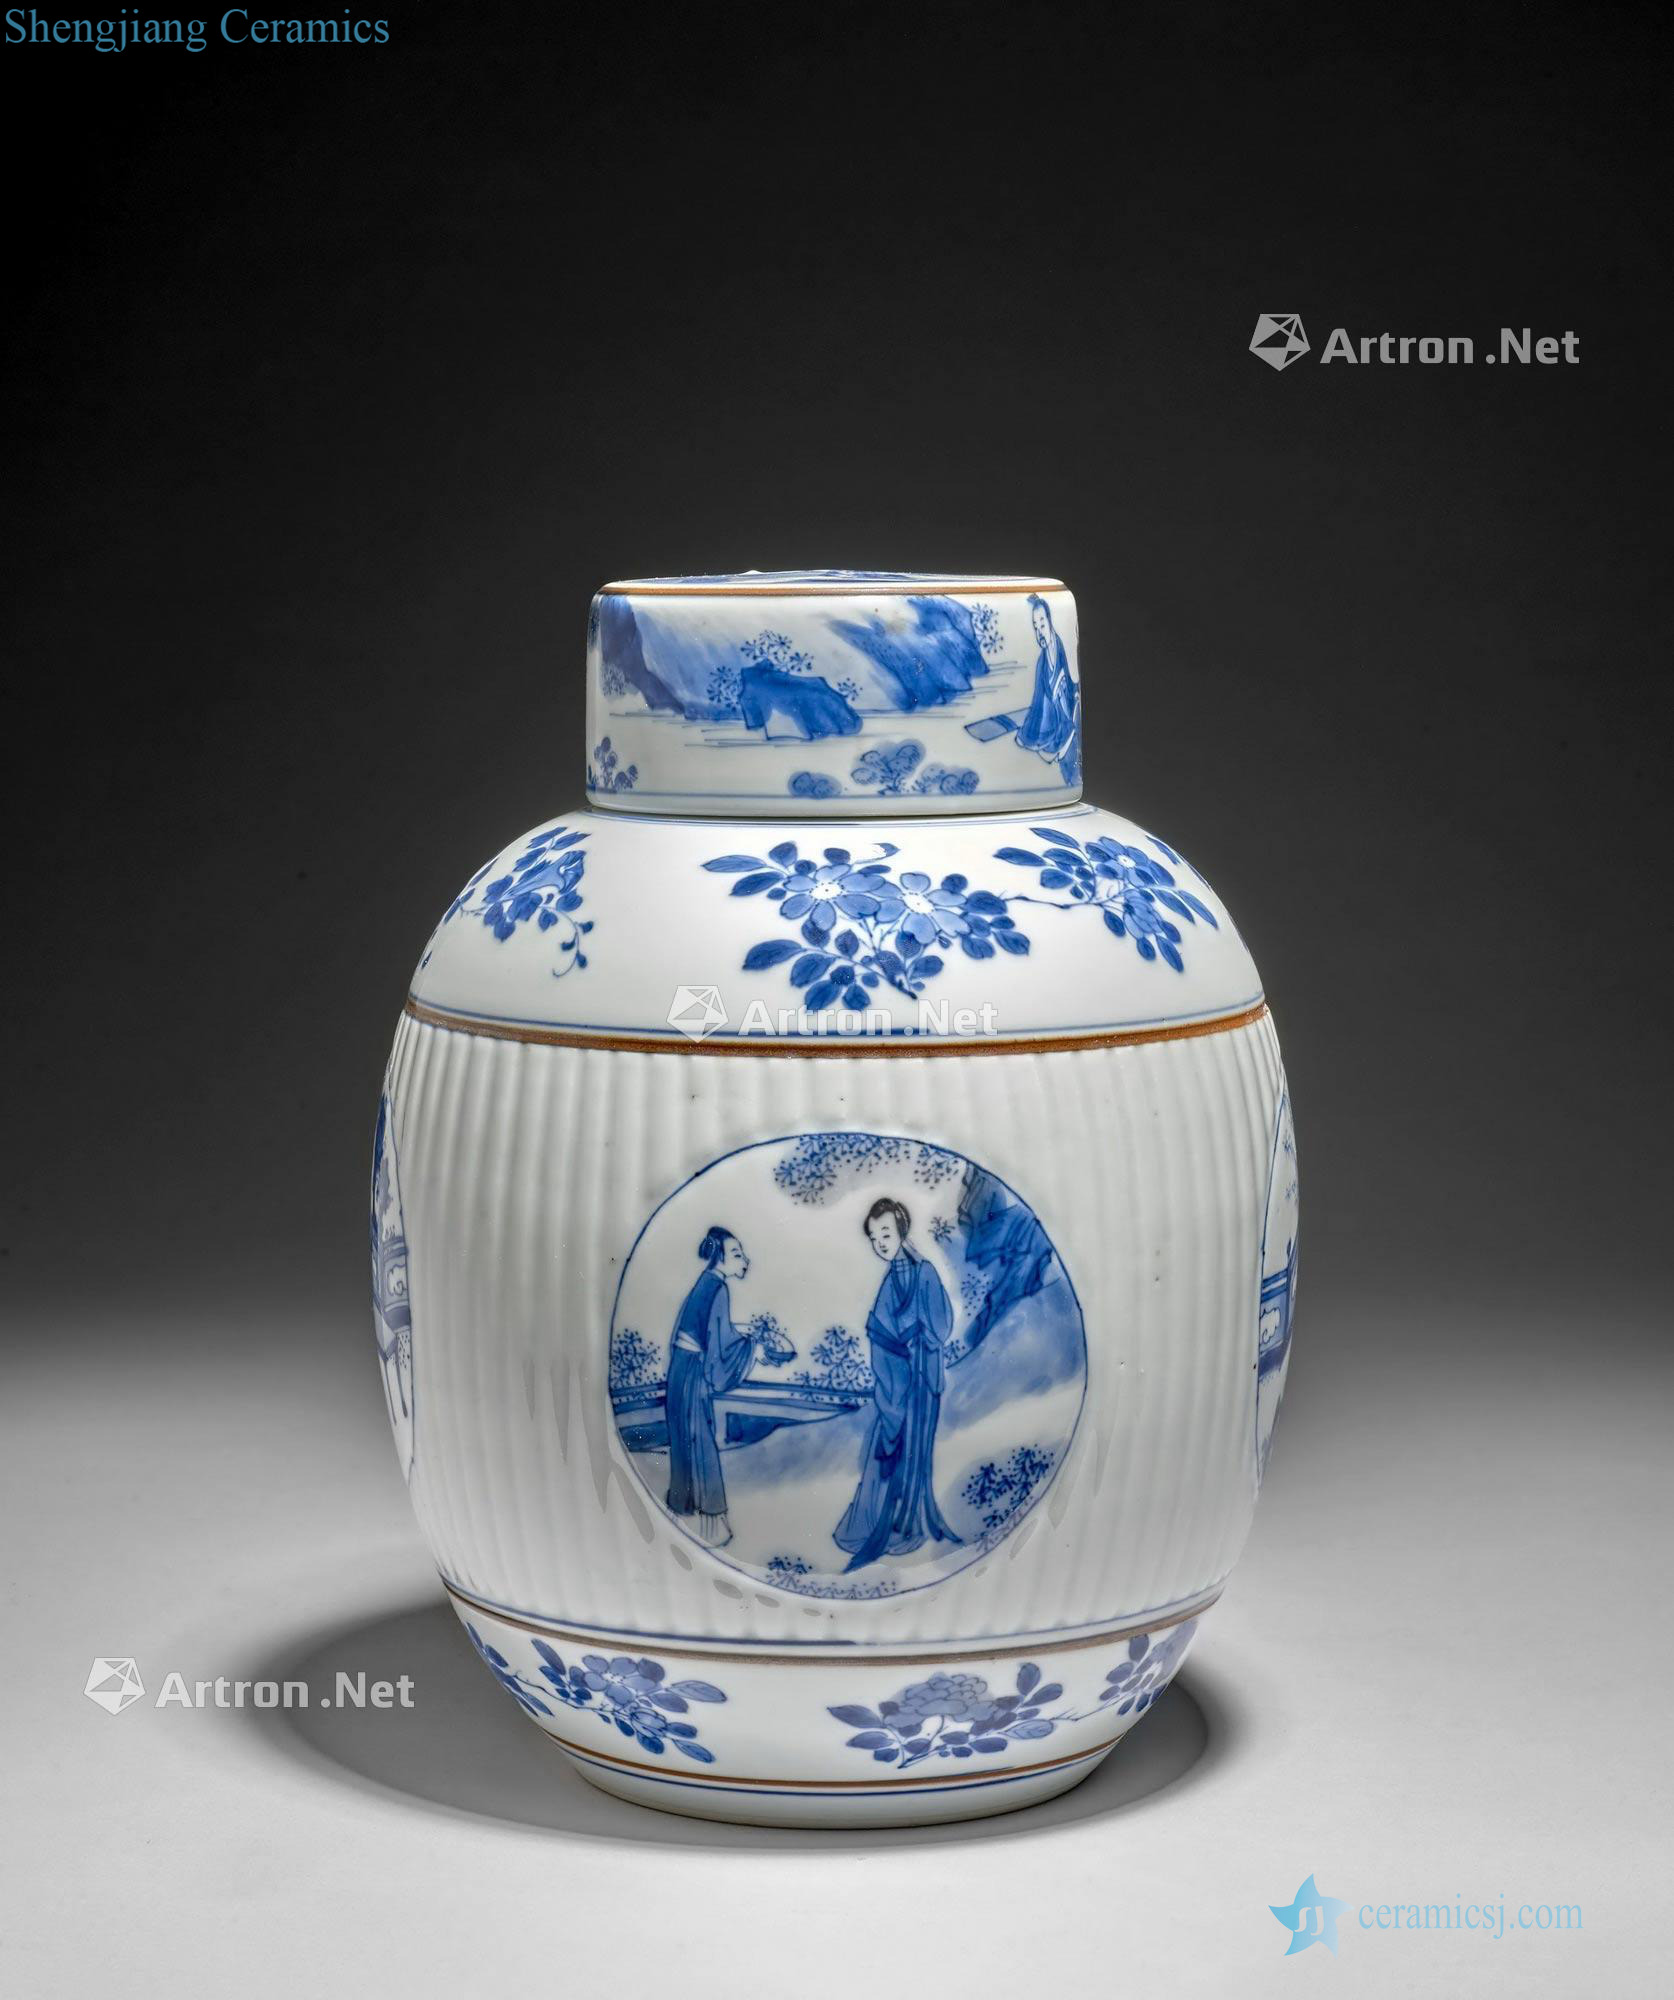 China, the Qing dynasty, Kangxi period (1662-1722), A blue and white porcelain jar and cover